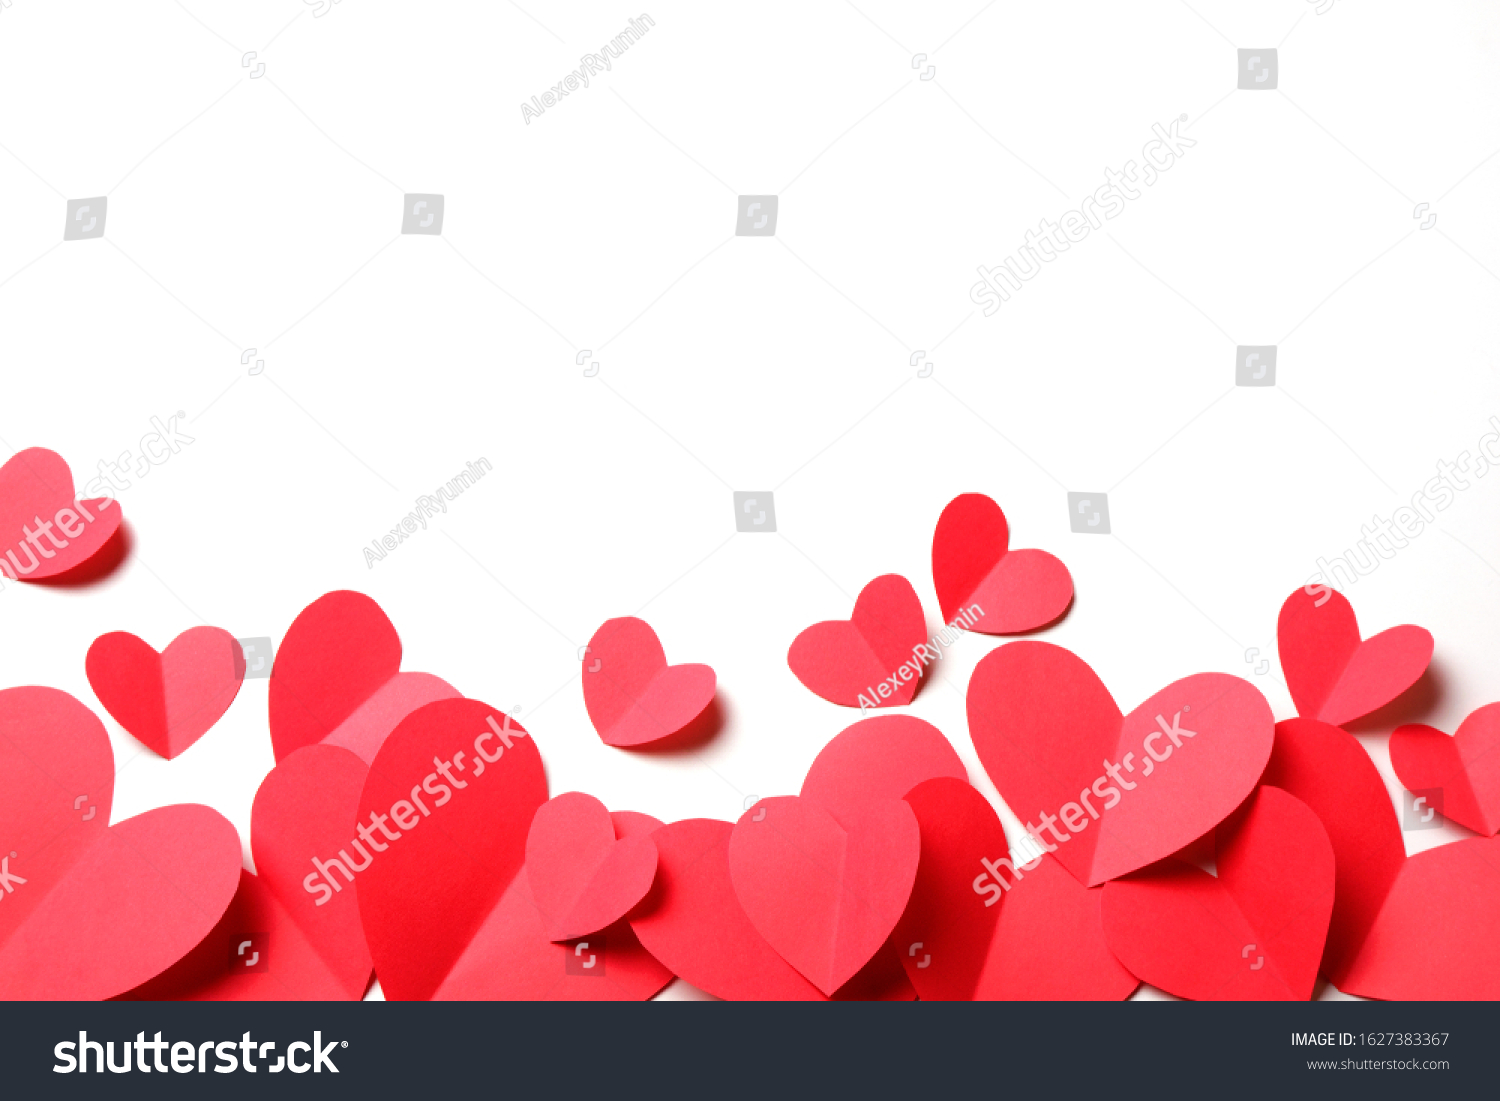 Cut out of red paper hearts on white background isolated. Cute Valentines day, Womans day, love, romantic or wedding composition with copy space for your text for banner, congratulation, card, offer, flyer, advertising, invitation.